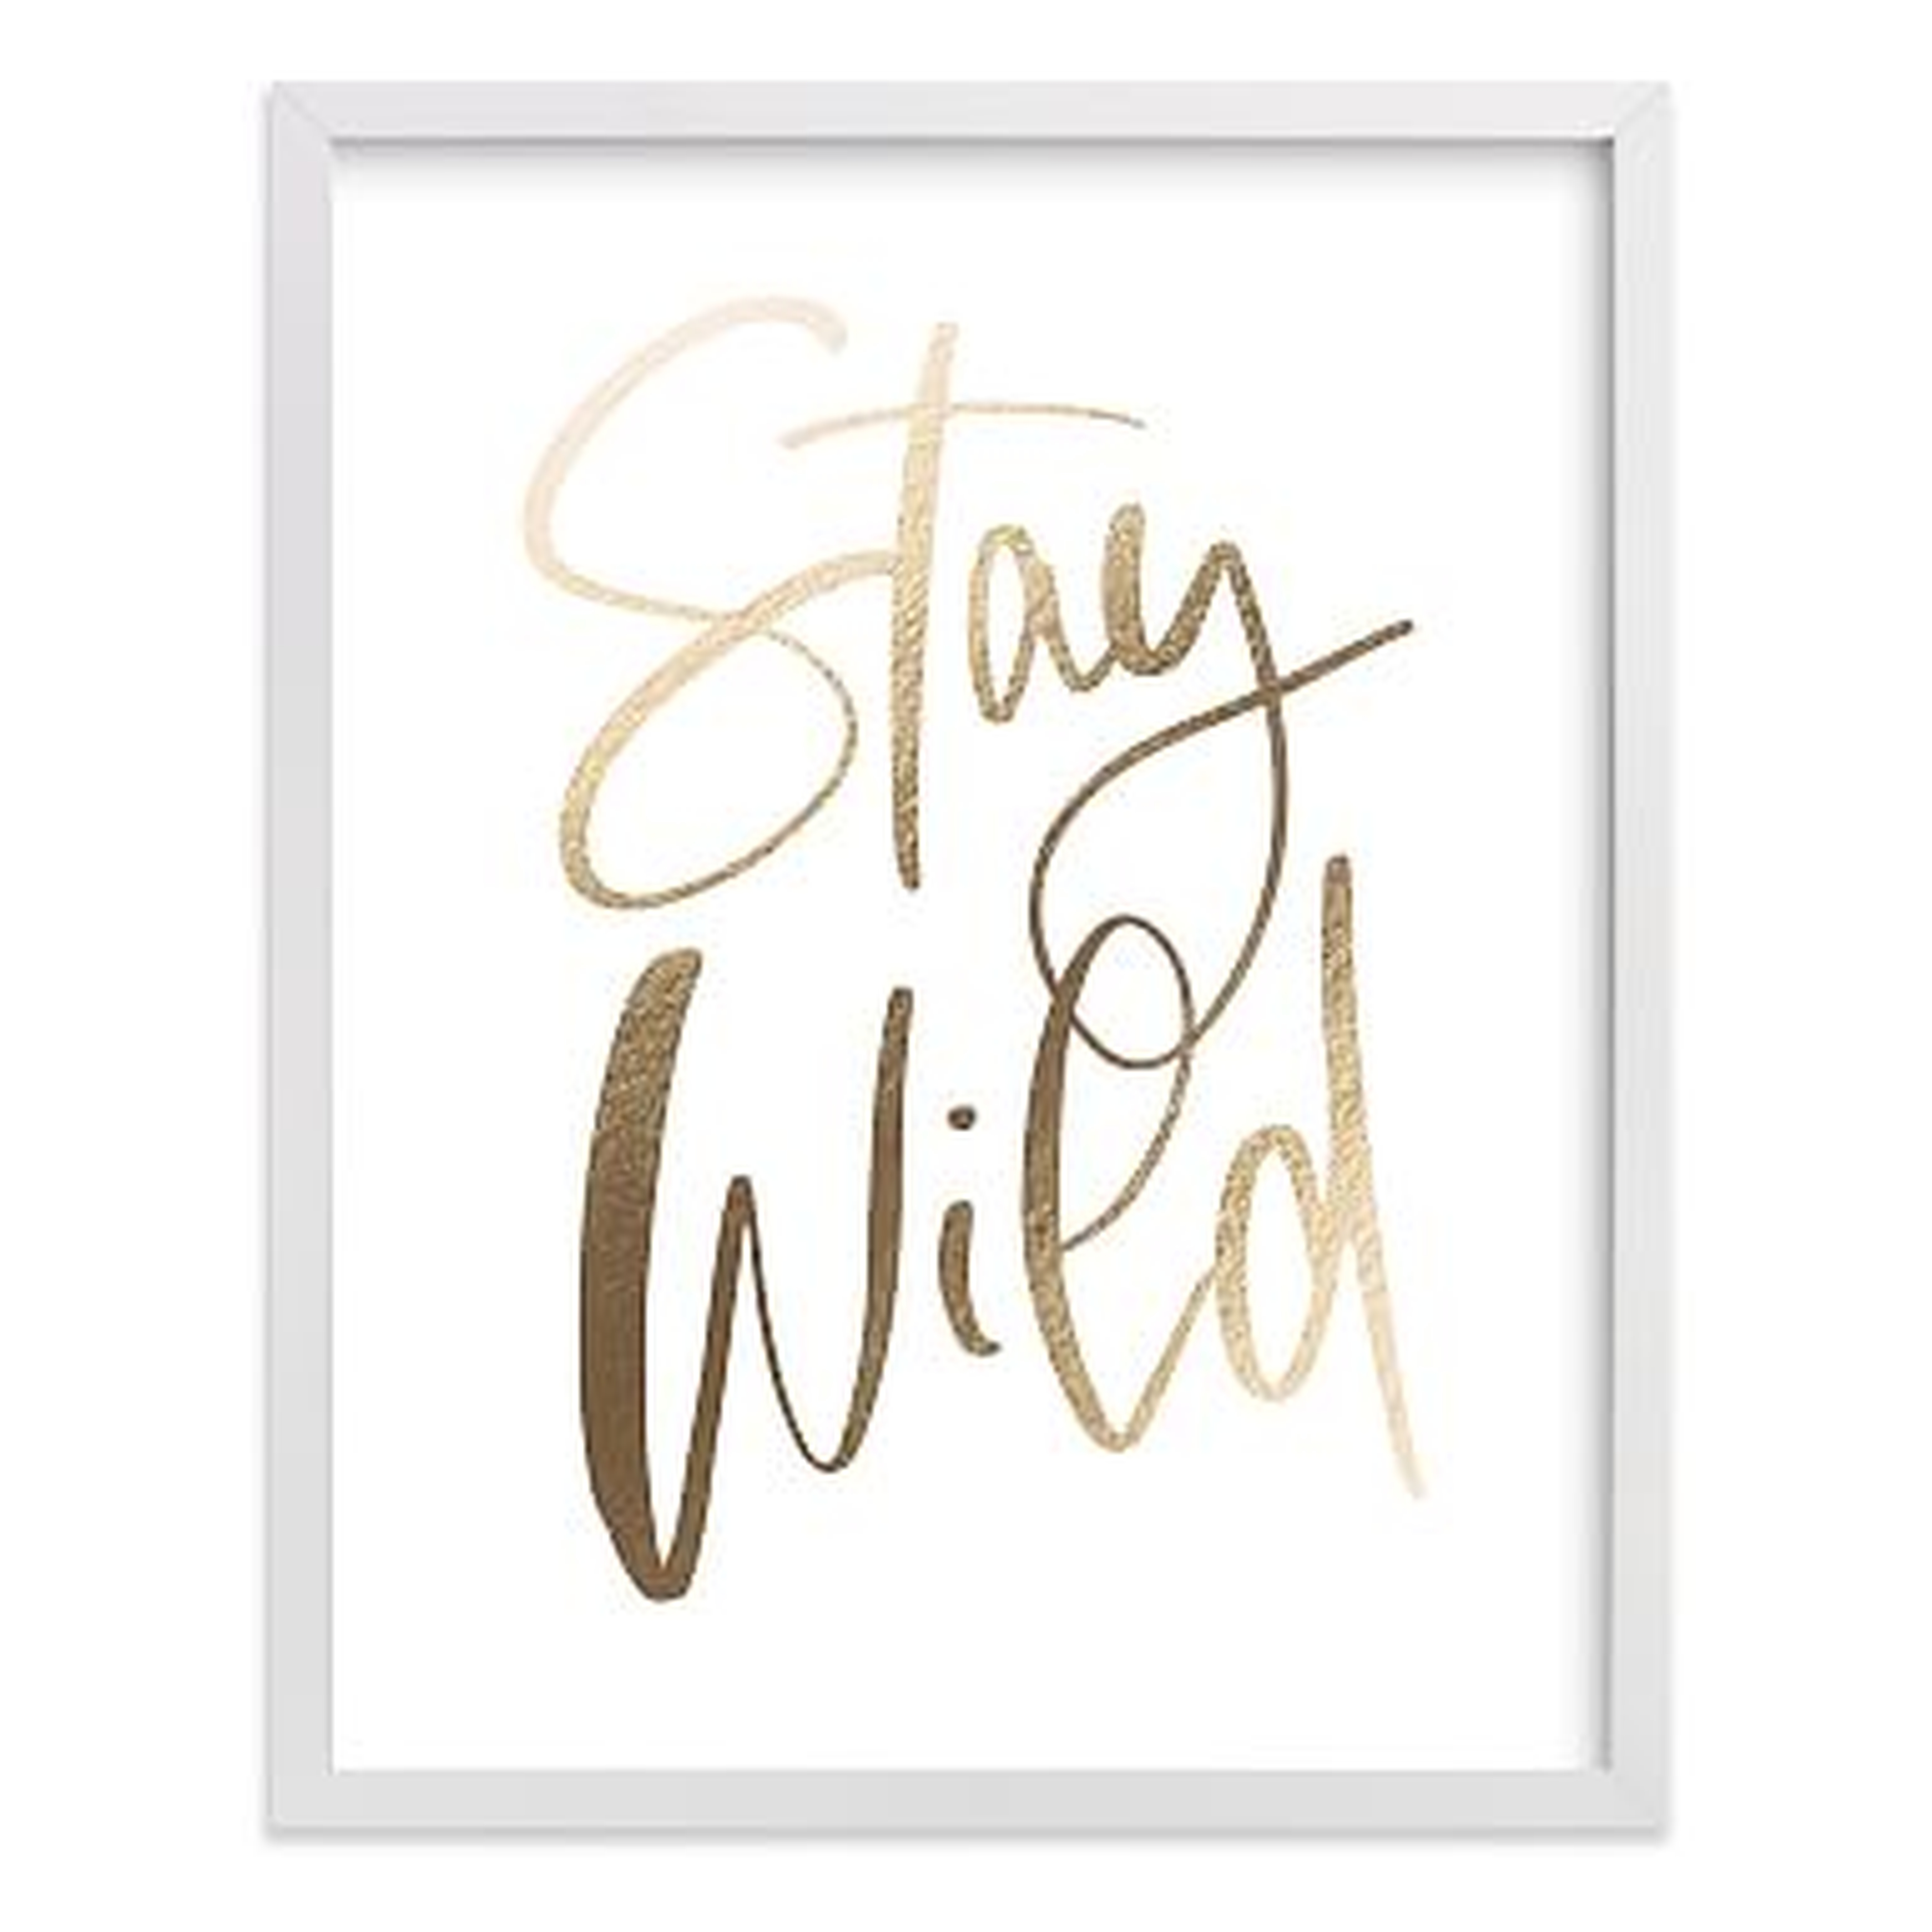 Stay Wild Framed Art by Minted(R), White, 11x14 - Pottery Barn Teen